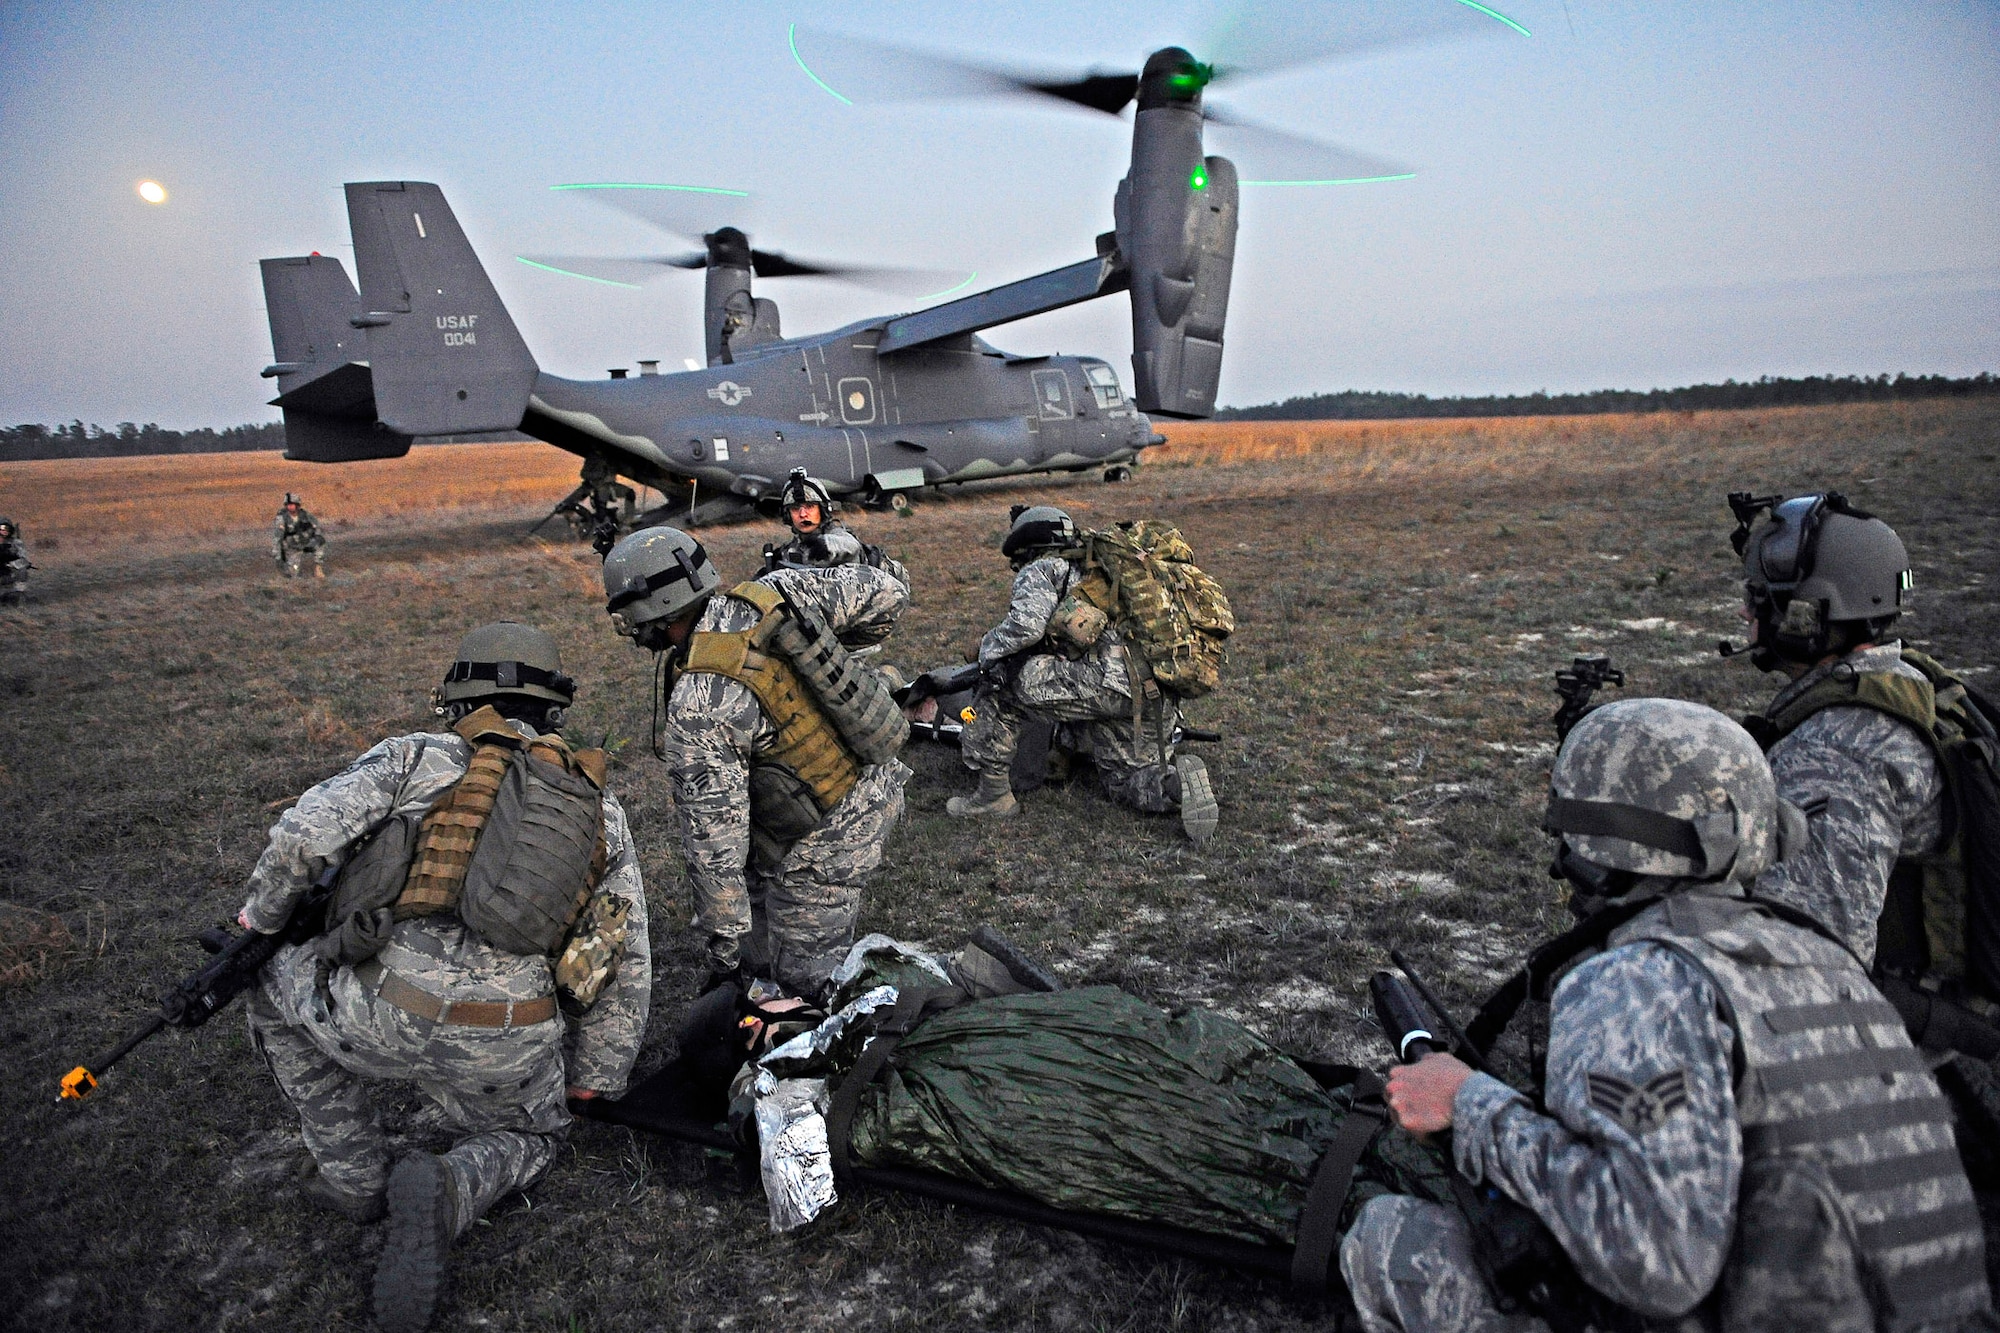 Airmen wait to load a simulated aircraft crash victim onto a CV-22 Osprey aircraft during the Emerald Warrior 2012 exercise at Hurlburt Field, Fla., March 7, 2012. Emerald Warrior is an annual two-week joint/combined tactical exercise sponsored by U.S. Special Operations Command. The exercise is designed to leverage lessons learned from operations Iraqi and Enduring Freedom to provide trained and ready forces to combatant commanders. (U.S. Air Force photo/Tech. Sgt. Charles Larkin Sr.)